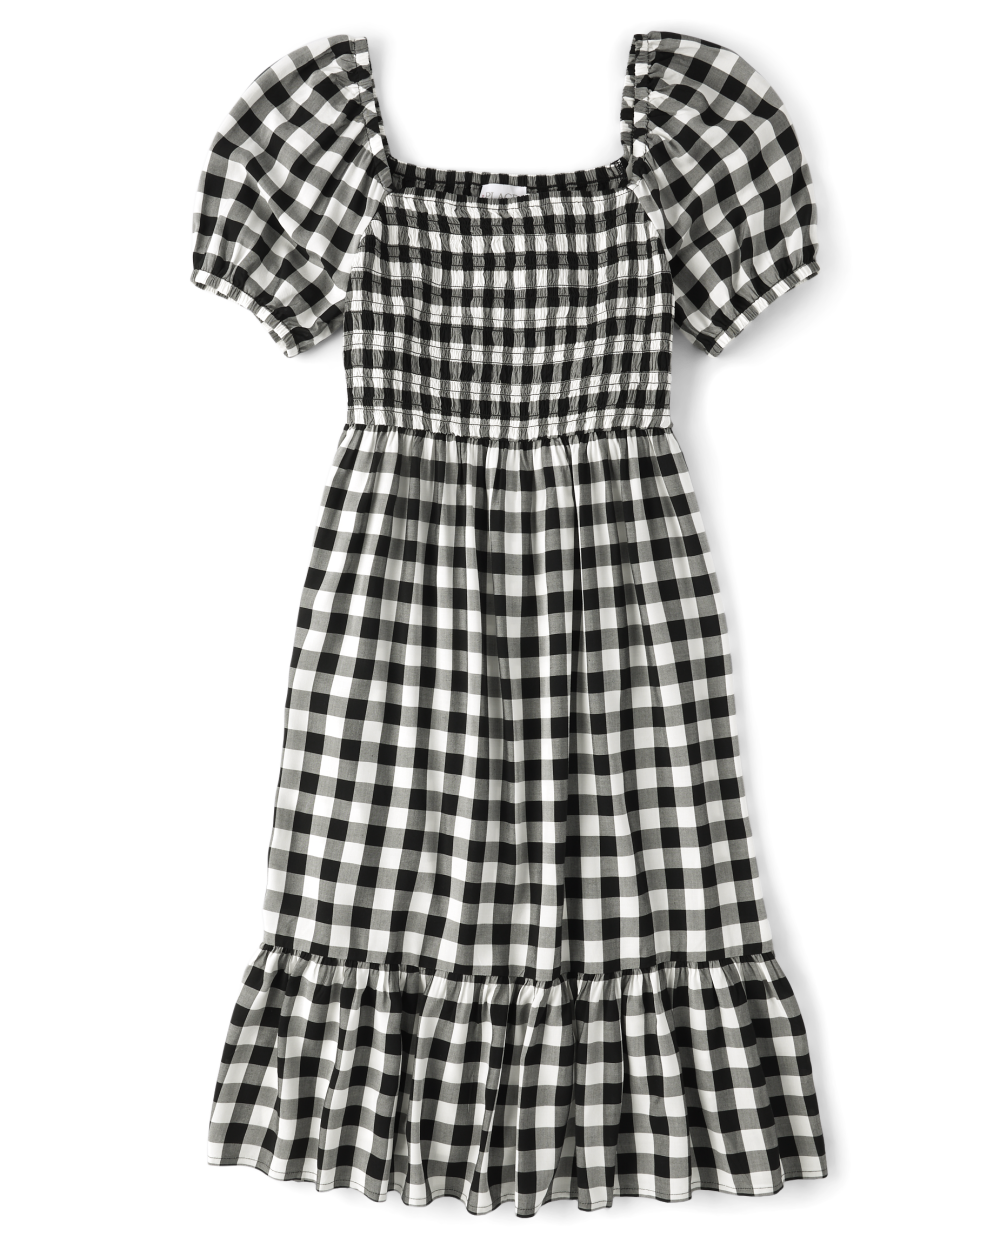 Puff Sleeves Short Sleeves Sleeves Checkered Gingham Print Above the Knee Rayon Smocked Square Neck Dress With Ruffles